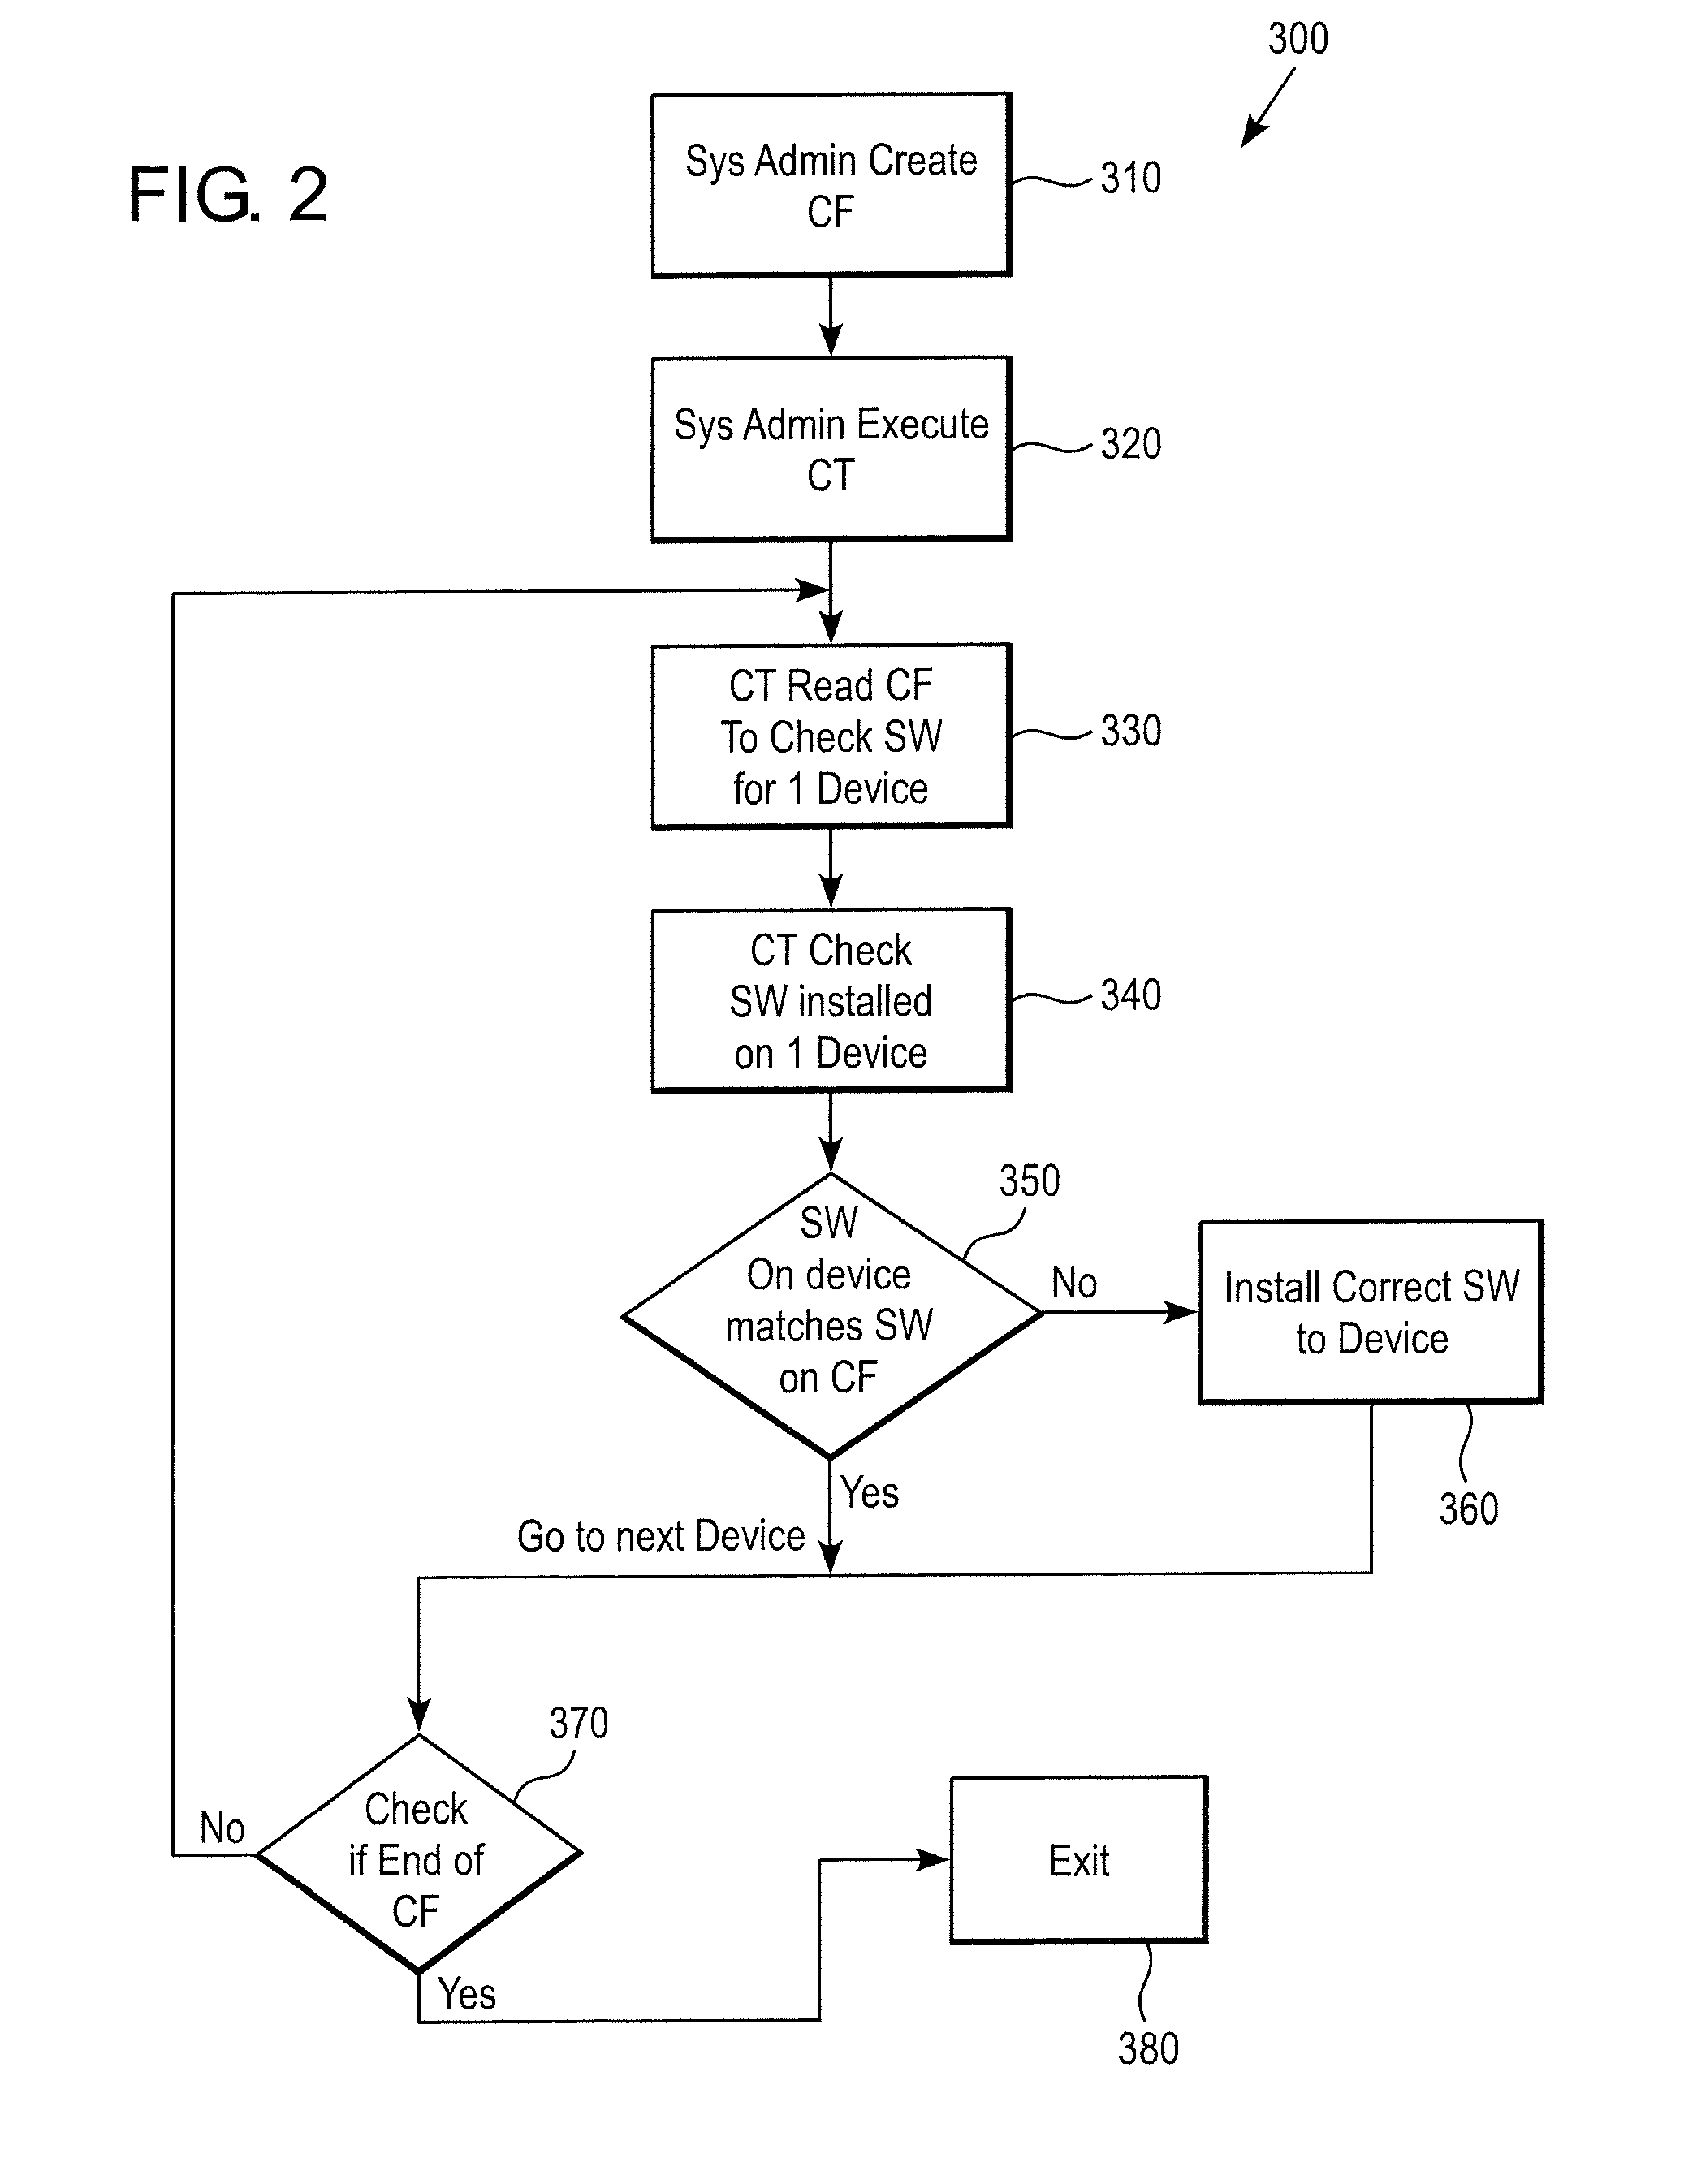 Method and system for managing software version compatibility amongst devices in a multi-device network environment